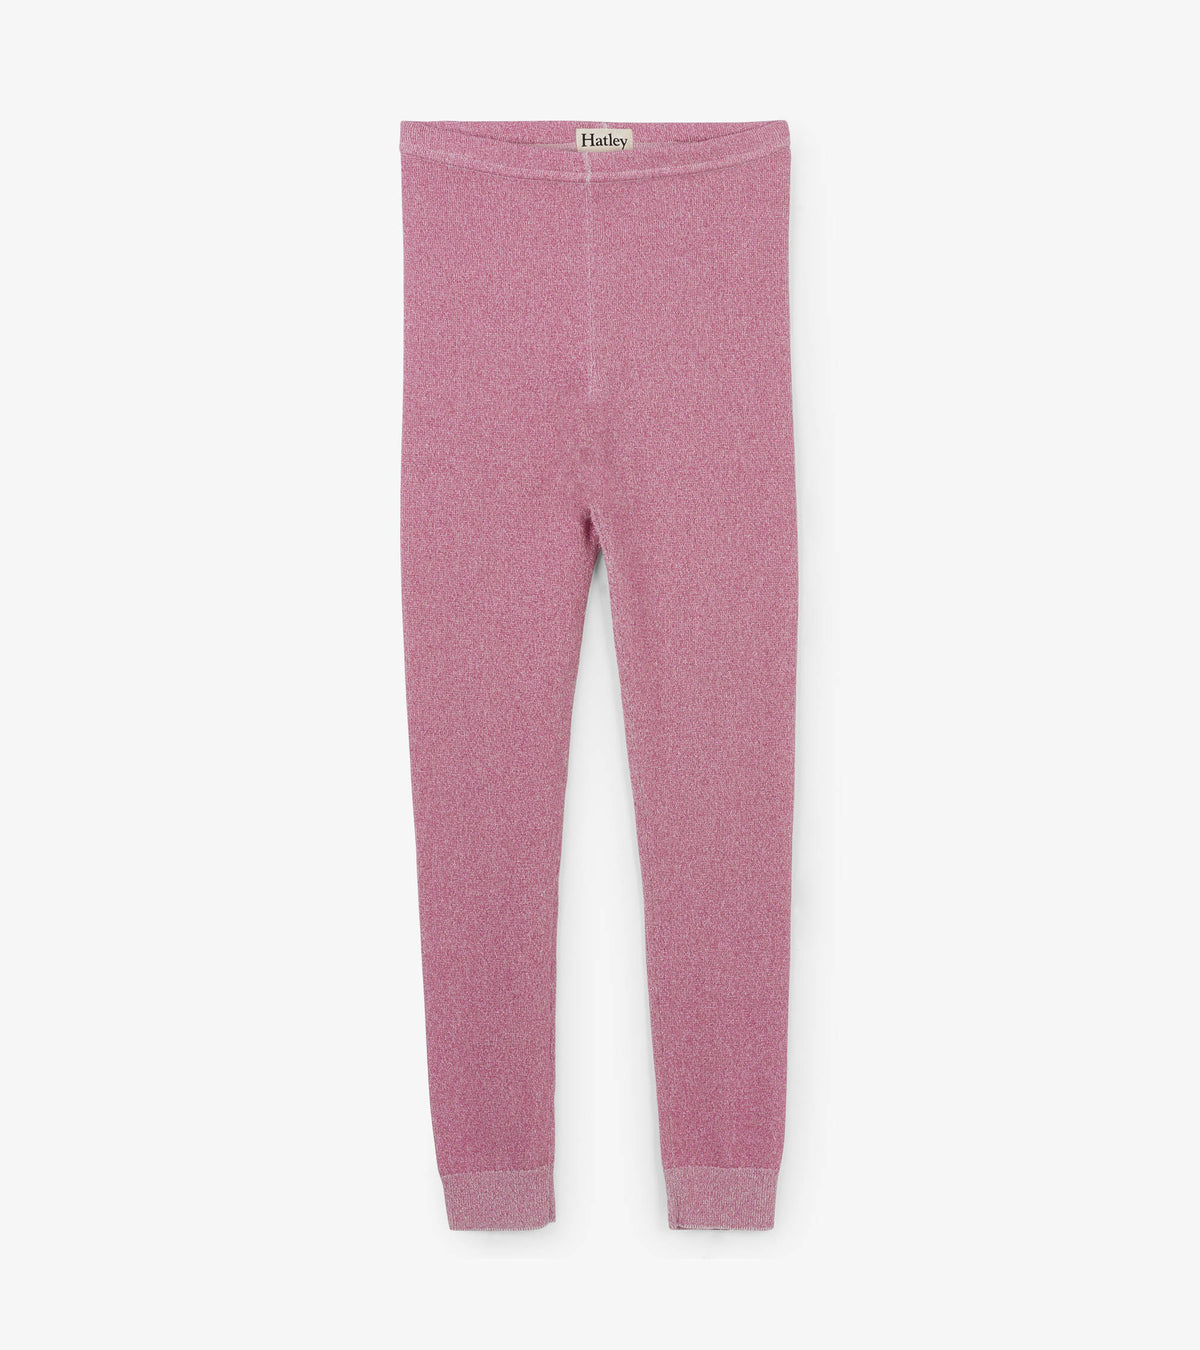 Hatley Rose Glimmer Cable Knit Leggings